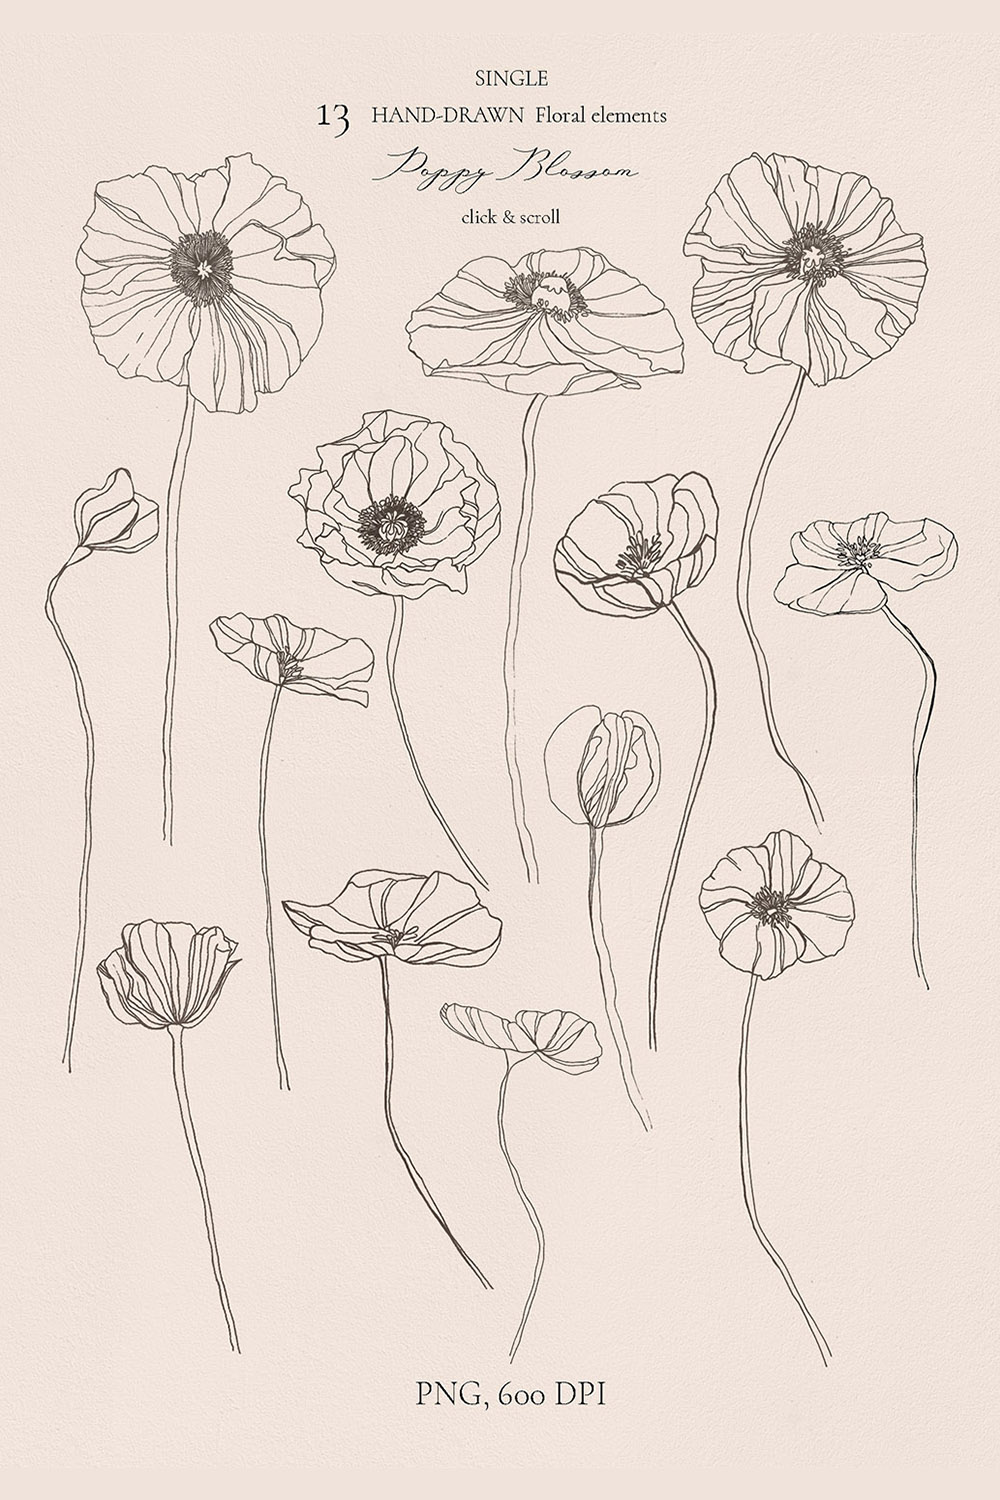 Hand Drawn Floral Elements Poppies pinterest image.